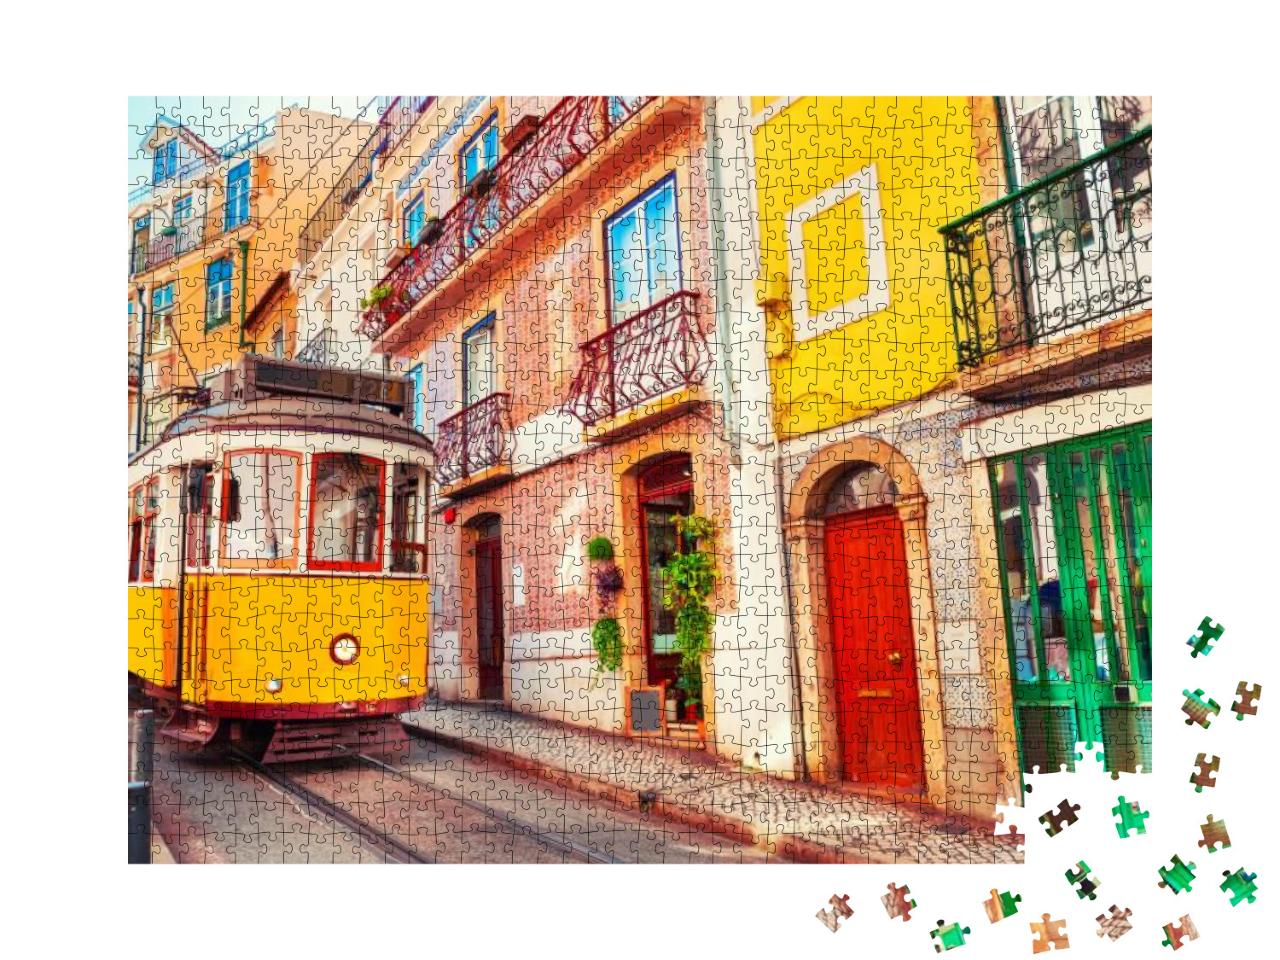 Yellow Vintage Tram on the Street in Lisbon, Portugal. Fa... Jigsaw Puzzle with 1000 pieces